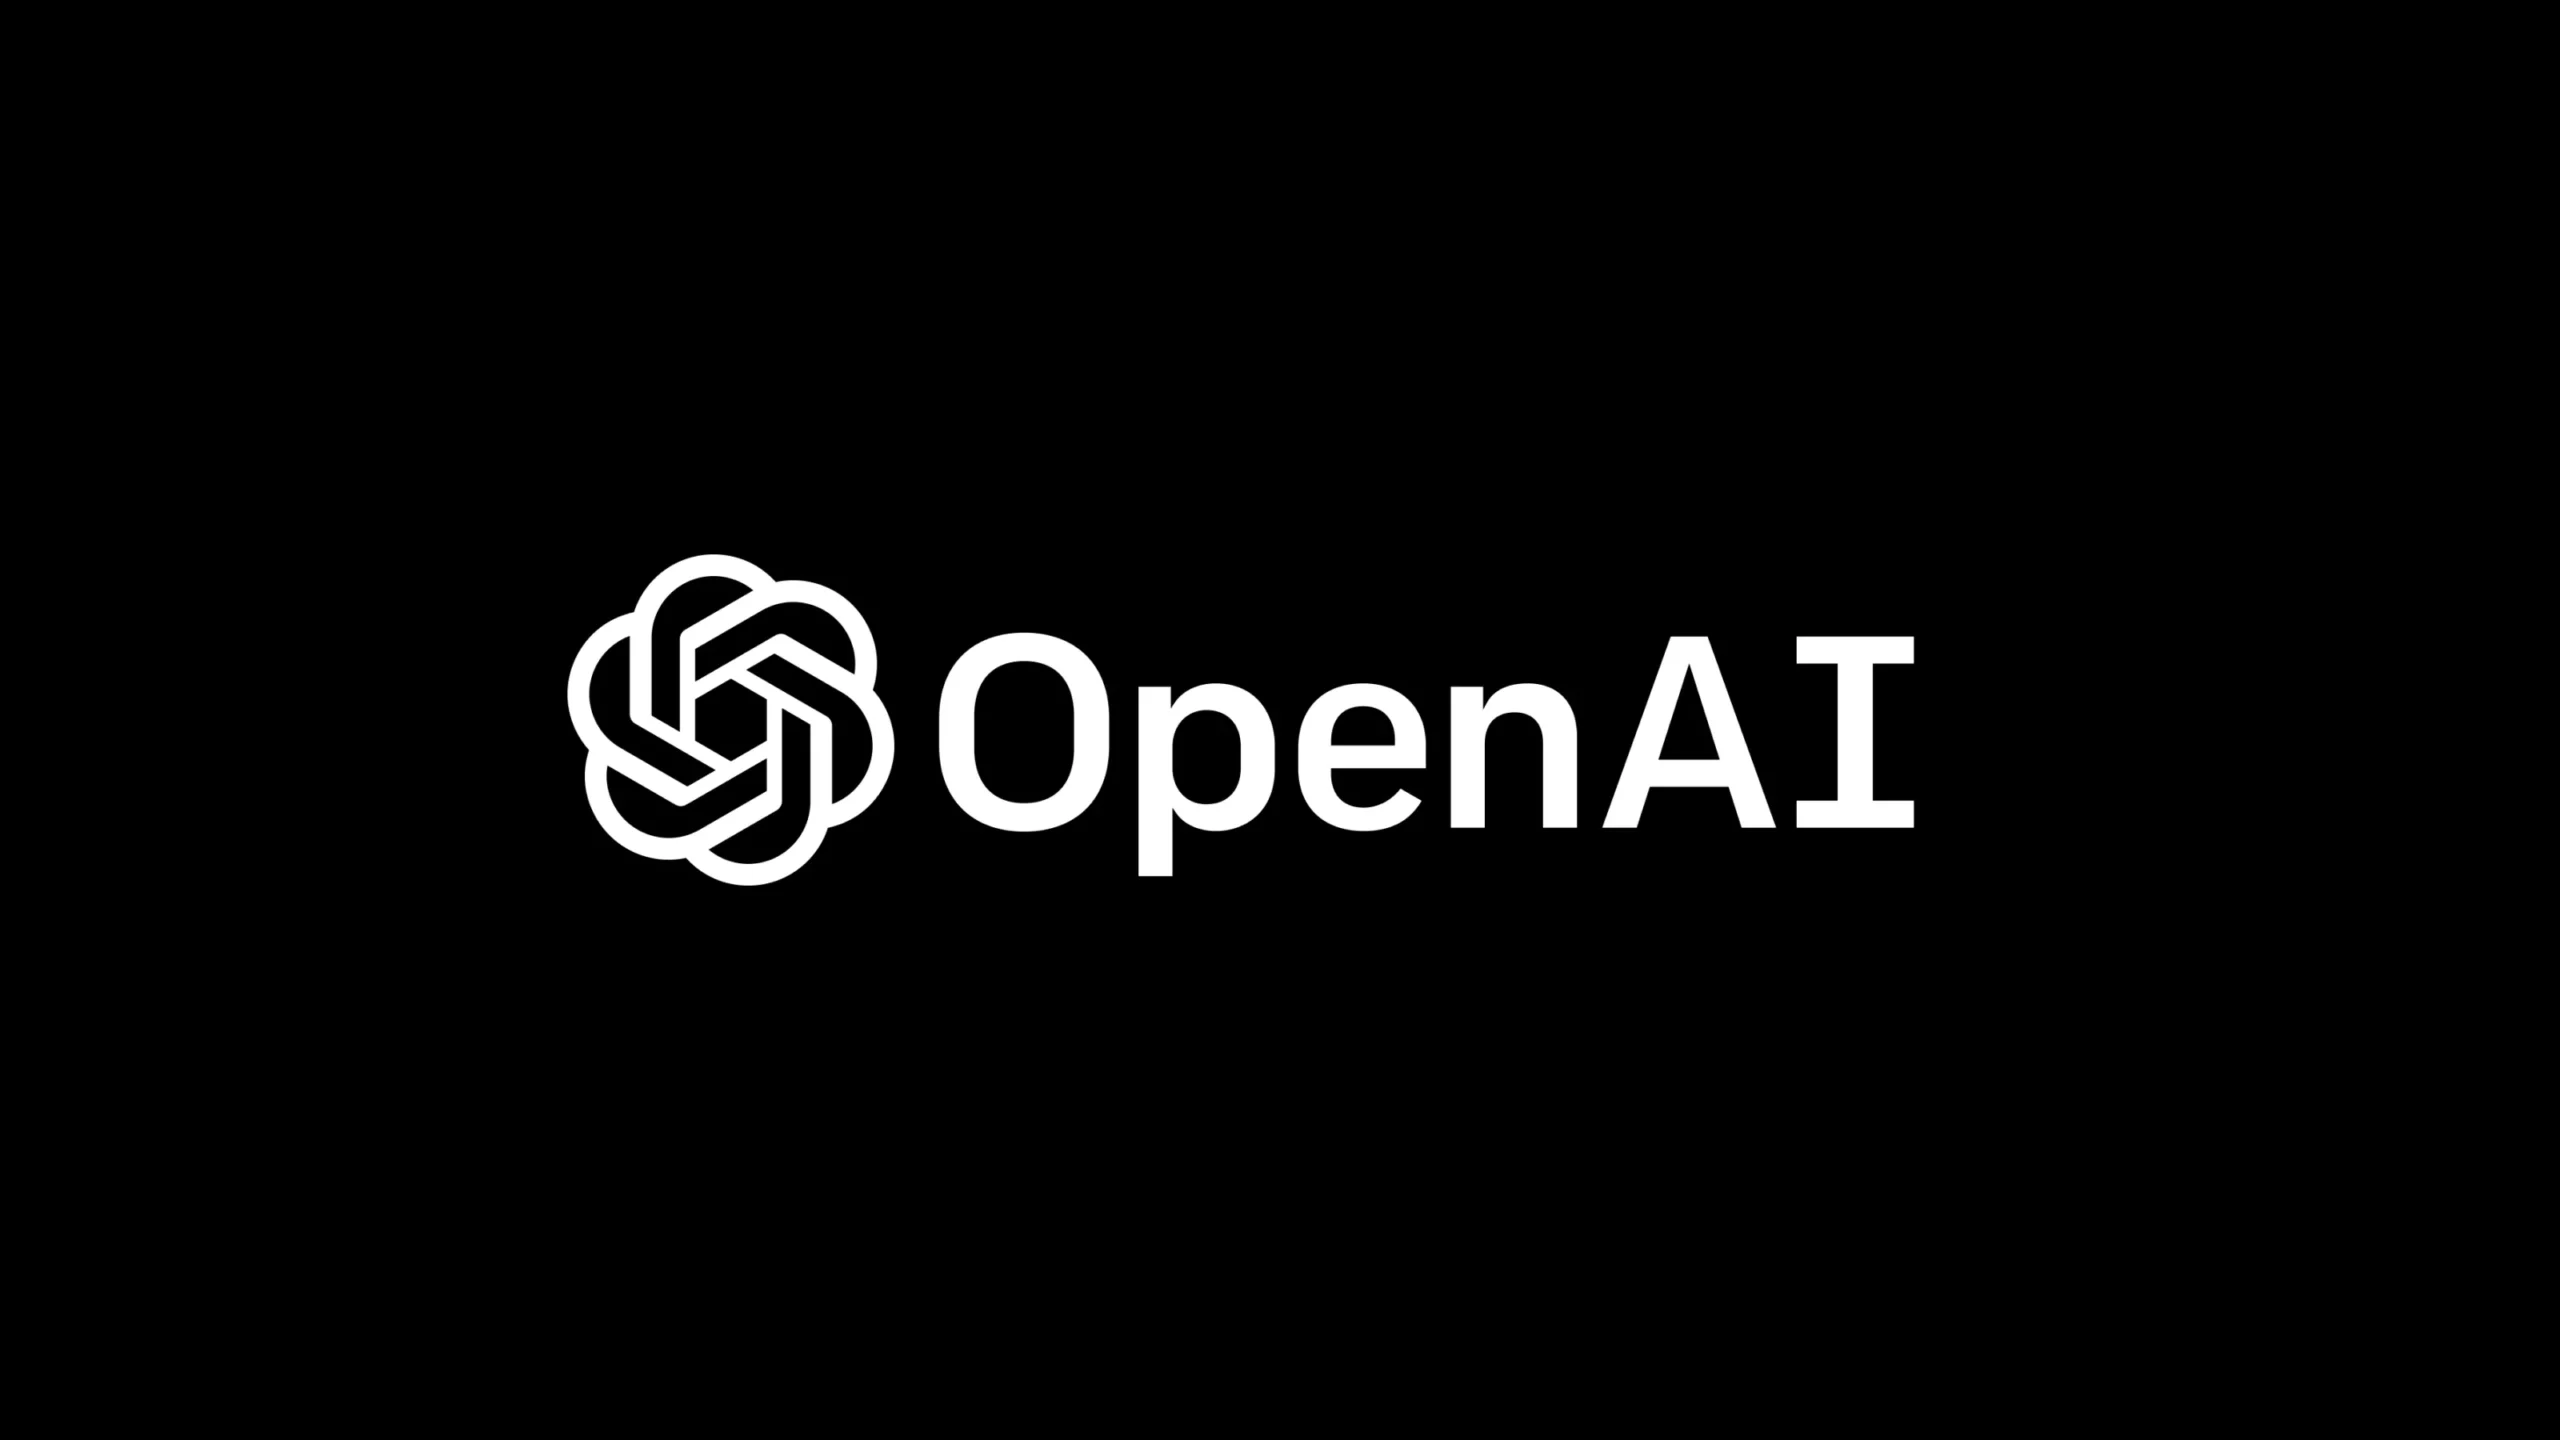 How Is OpenAI Different From Other AI Companies